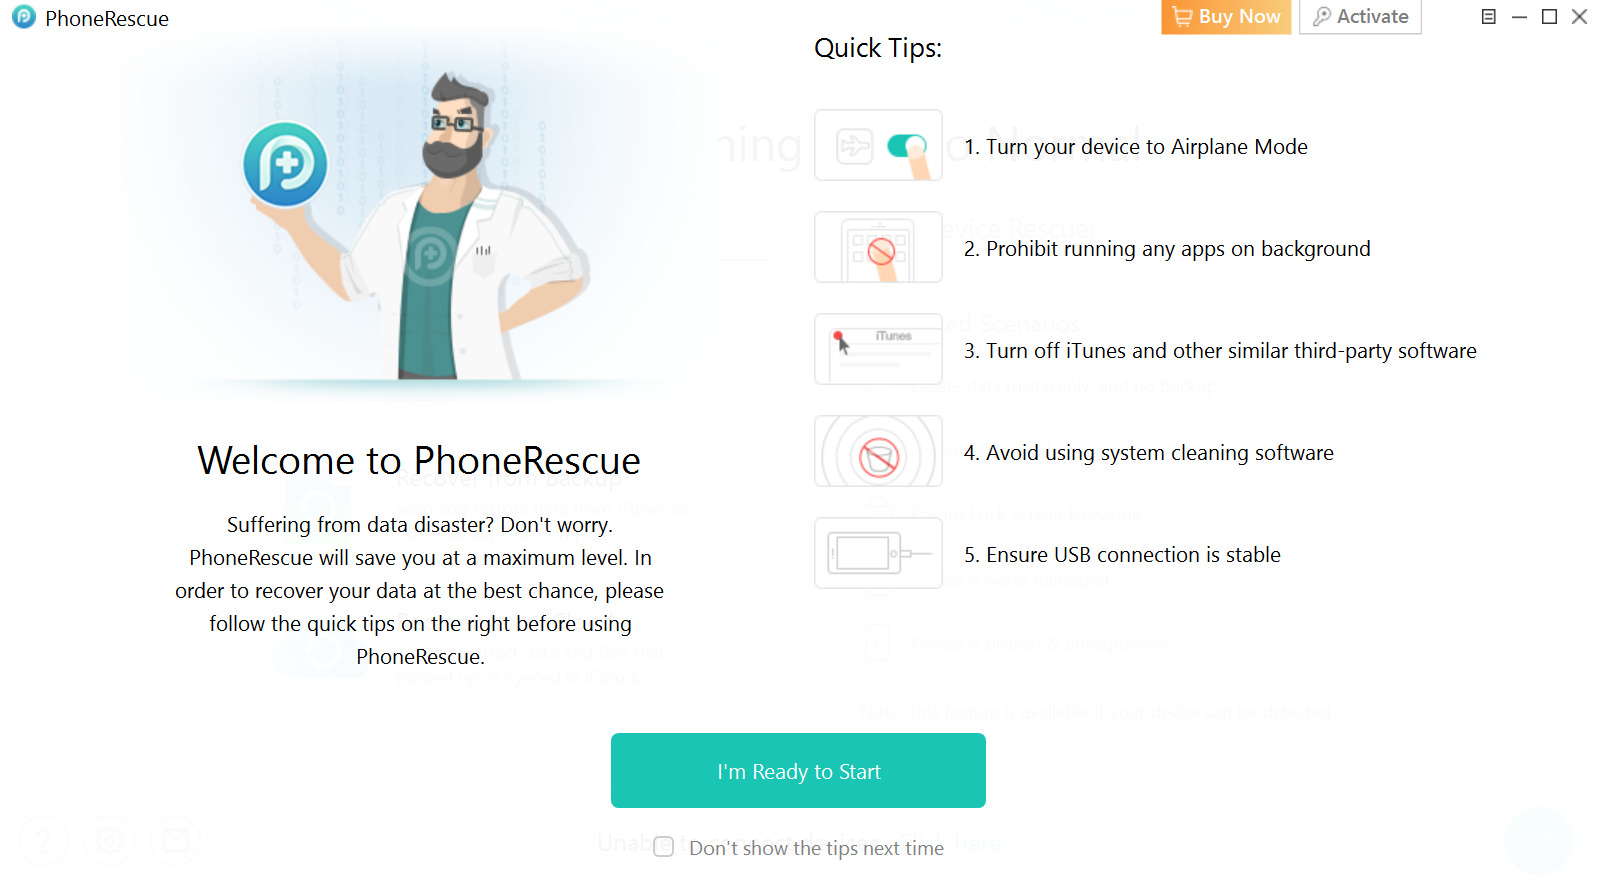 Launch PhoneRescue on your device.